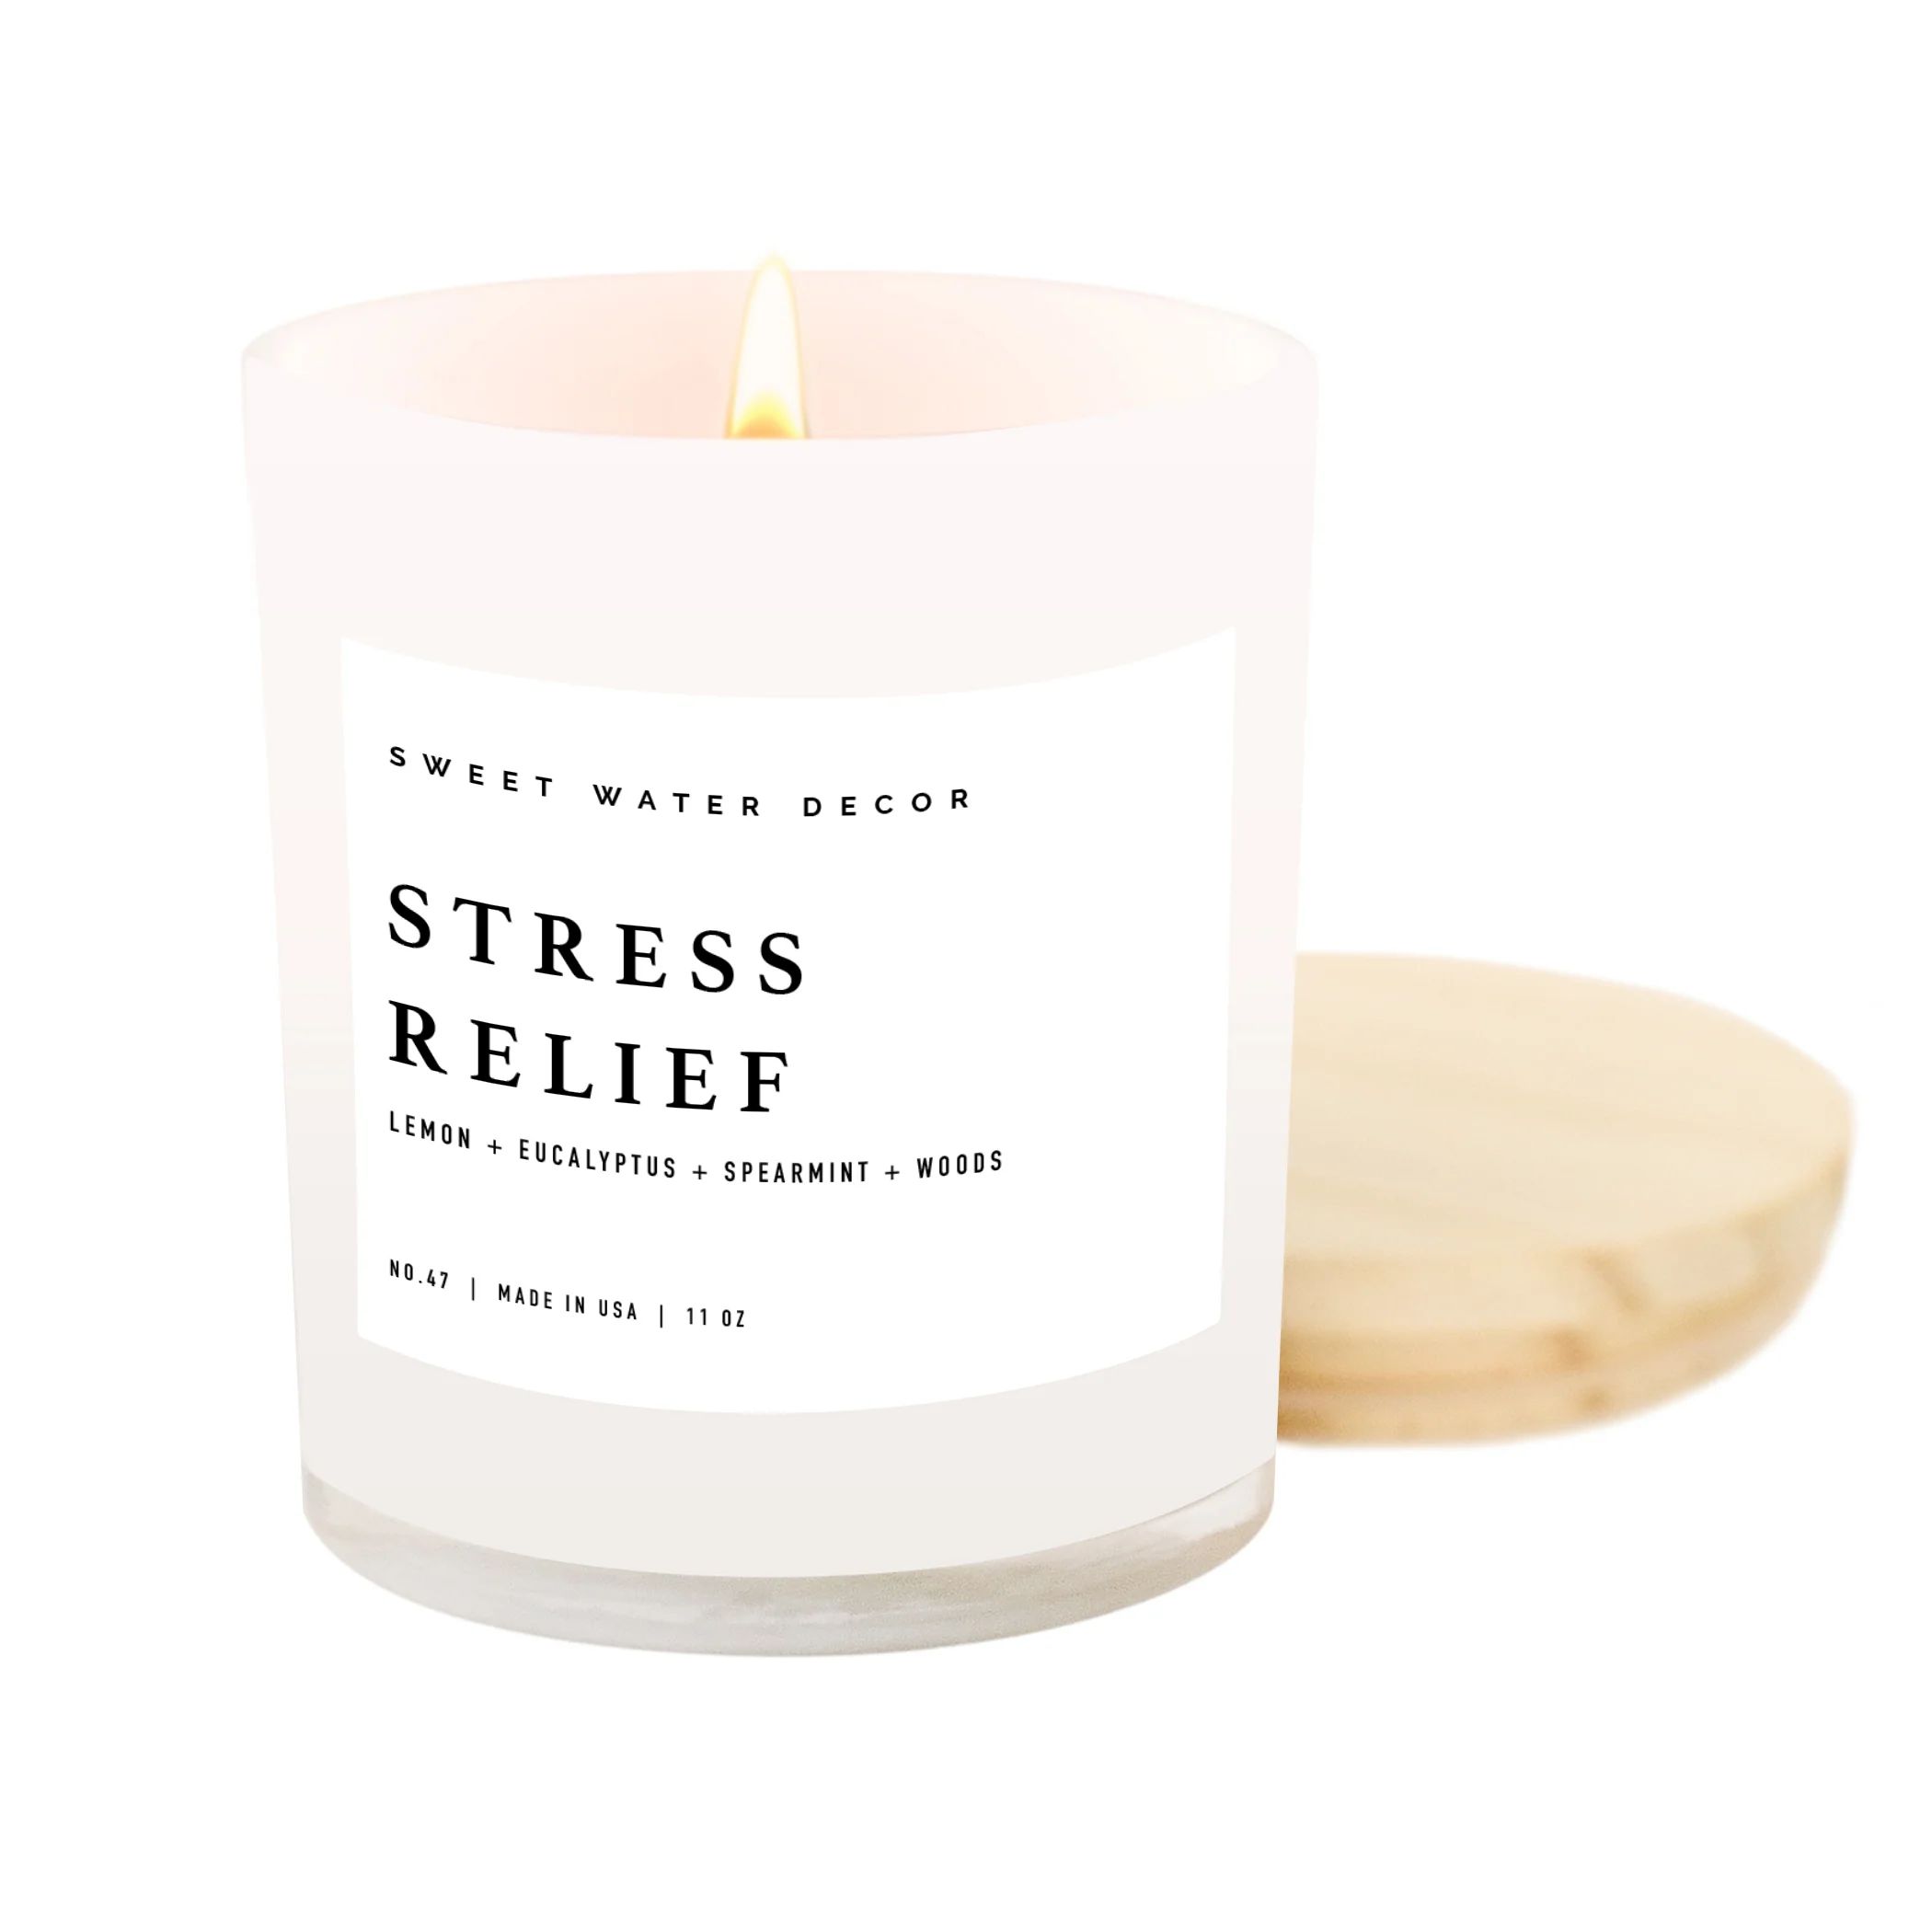 Stress Relief Soy Candle - White Jar - 11 oz | Sweet Water Decor, LLC